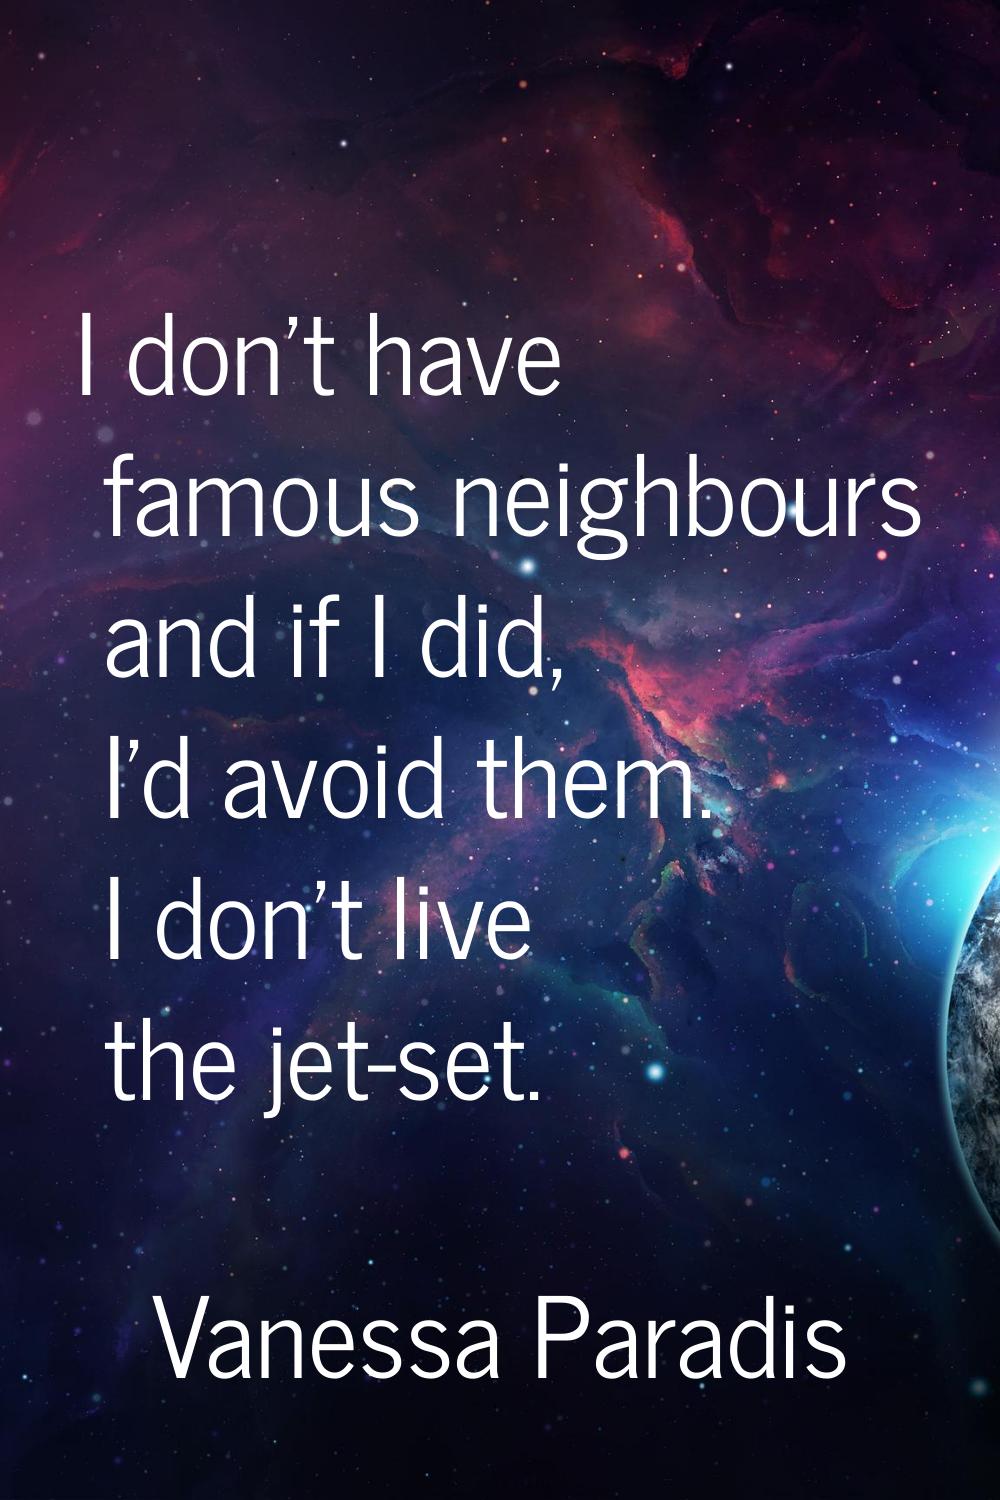 I don't have famous neighbours and if I did, I'd avoid them. I don't live the jet-set.